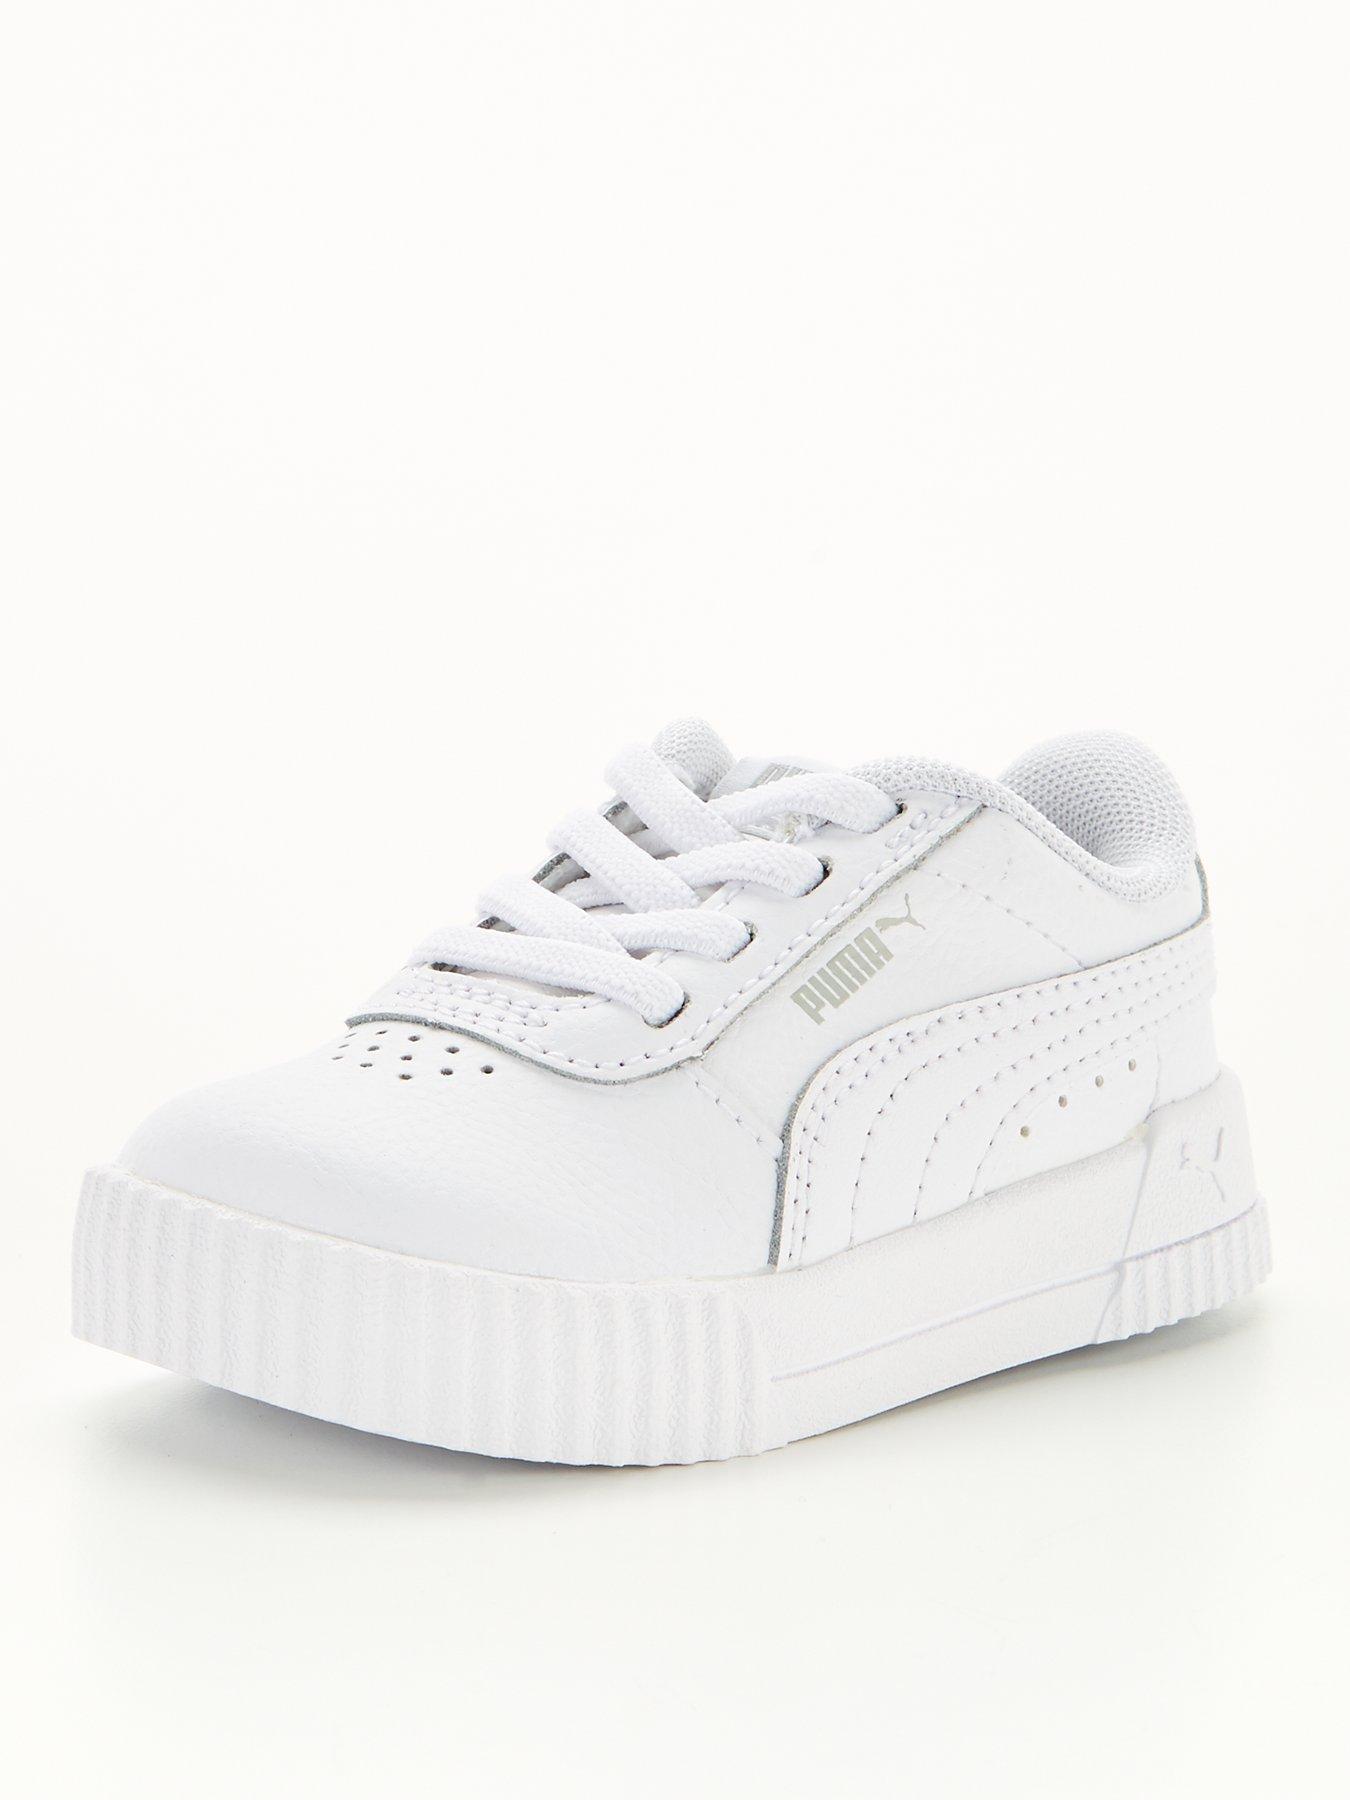  Carina Infant Trainers - White